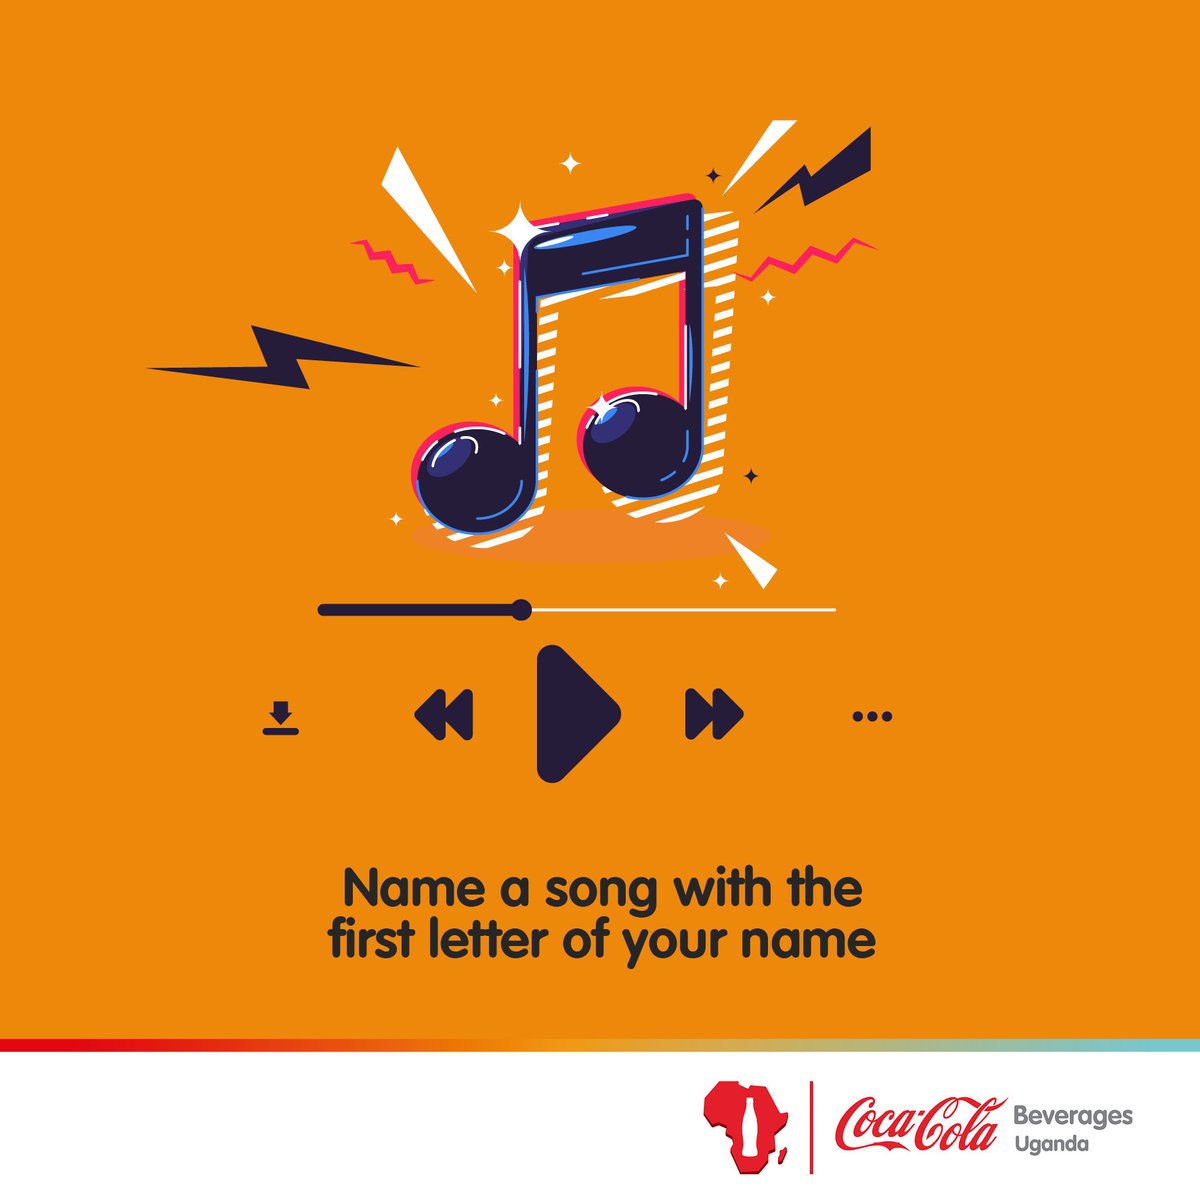 This #FunFriday, we know that there is that song that starts with the first letter of your name, drop the title of the song in the comment section. #RefreshUG #CCBU